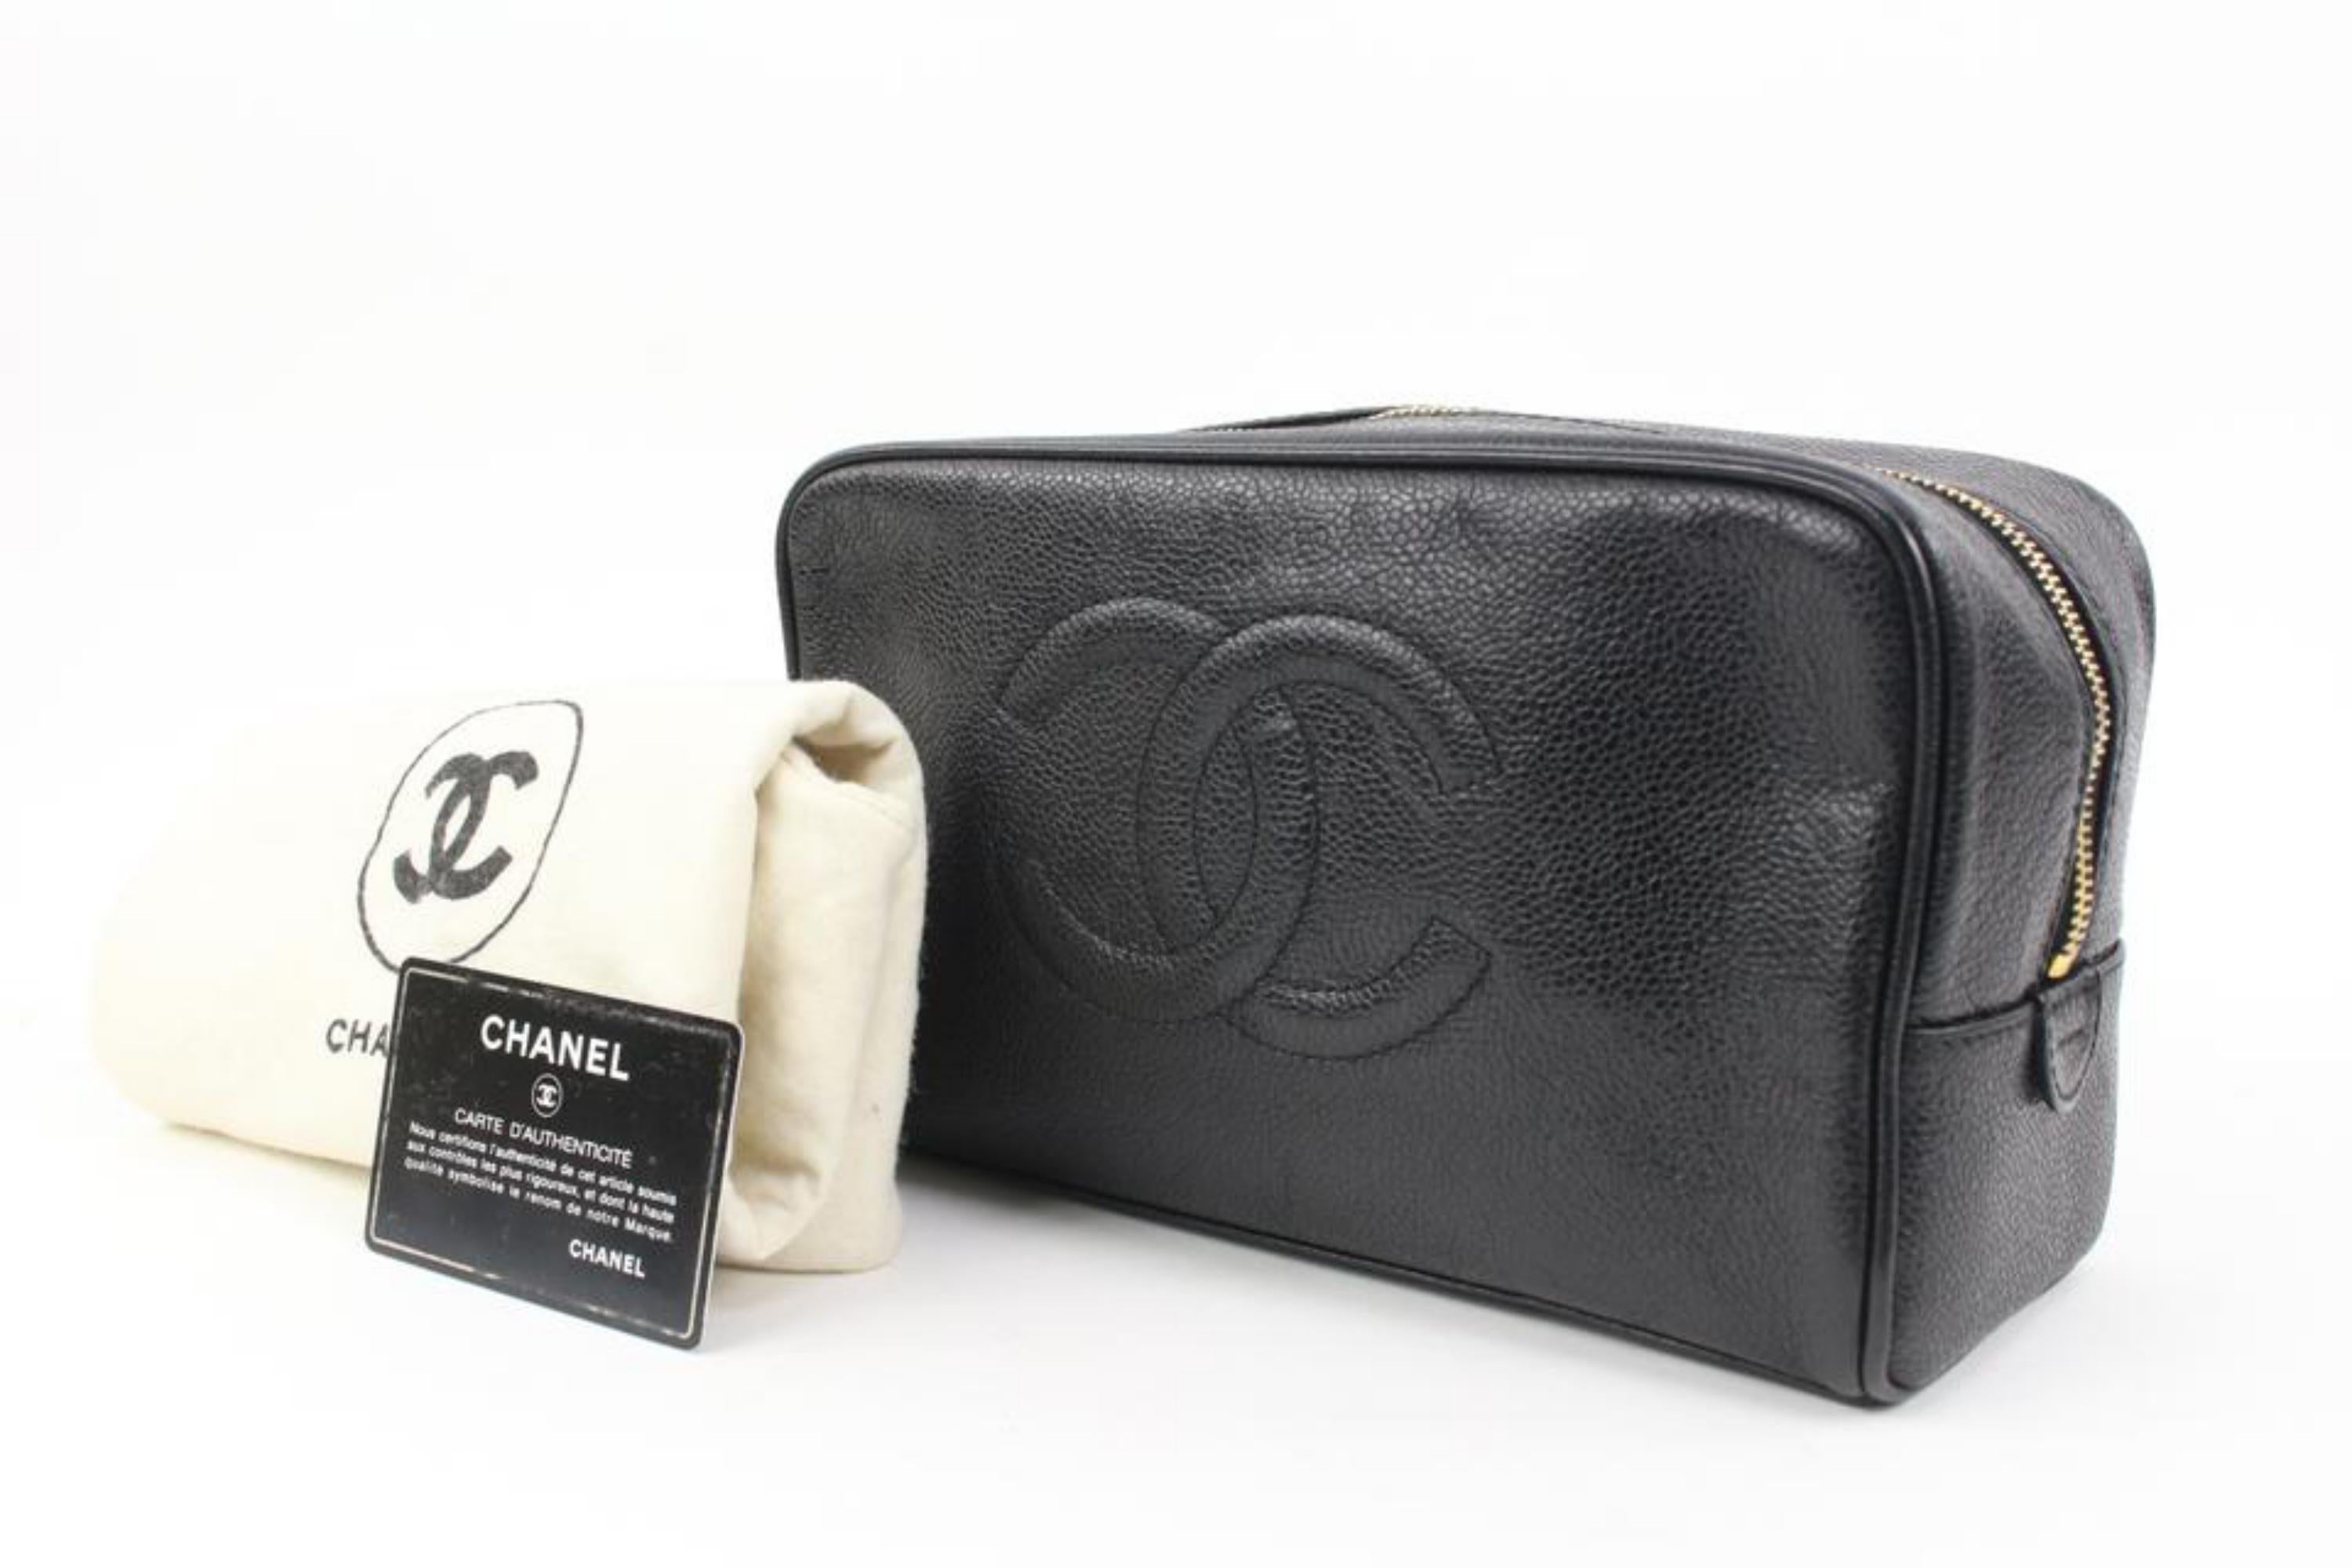 Chanel Black Caviar CC Logo Cosmetic Pouch 95ck221s
Date Code/Serial Number: 3885717
Made In: Italy
Measurements: Length:  9